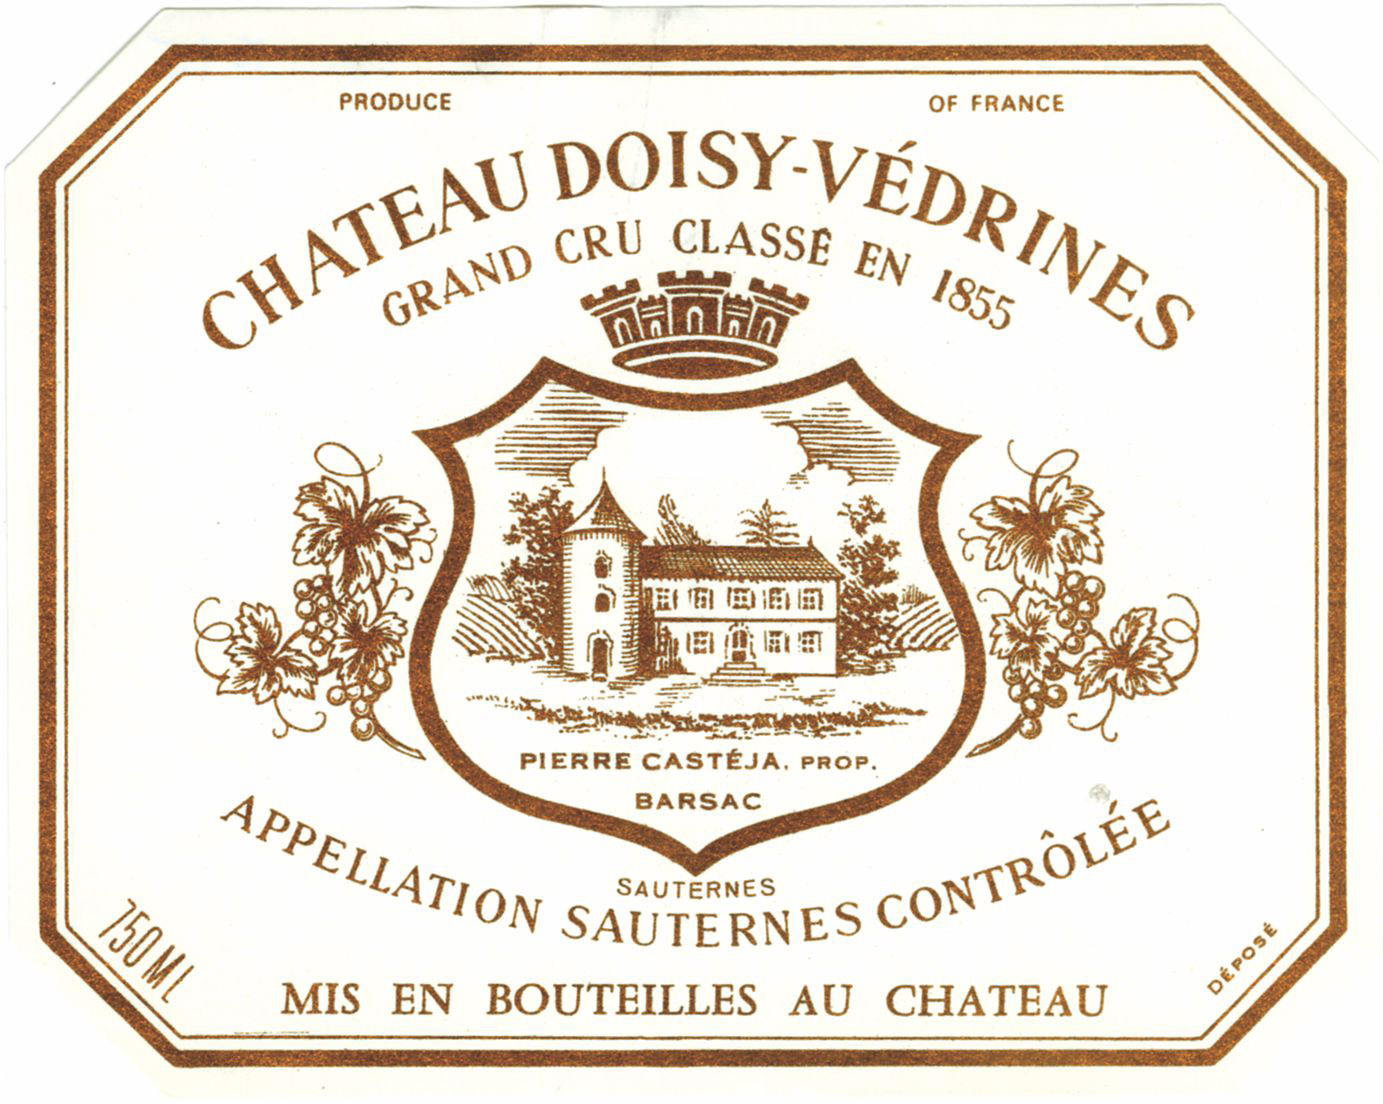 Chateau Doisy-Vedrines label